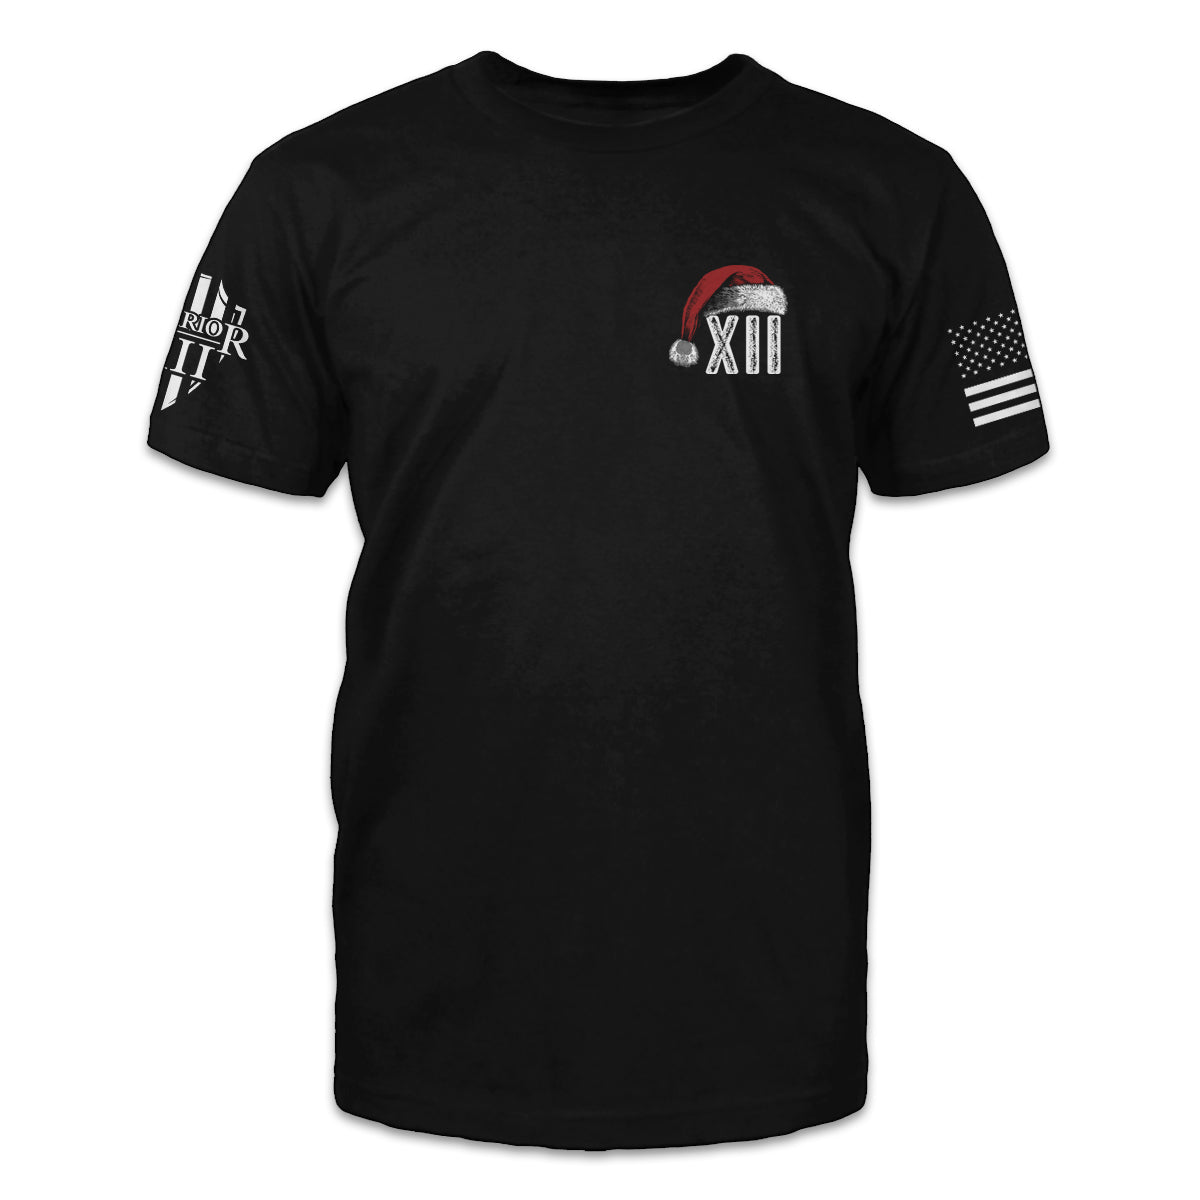 A black t-shirt with a small pocket image on the front of a Santa hat with an XII for Warrior 12.